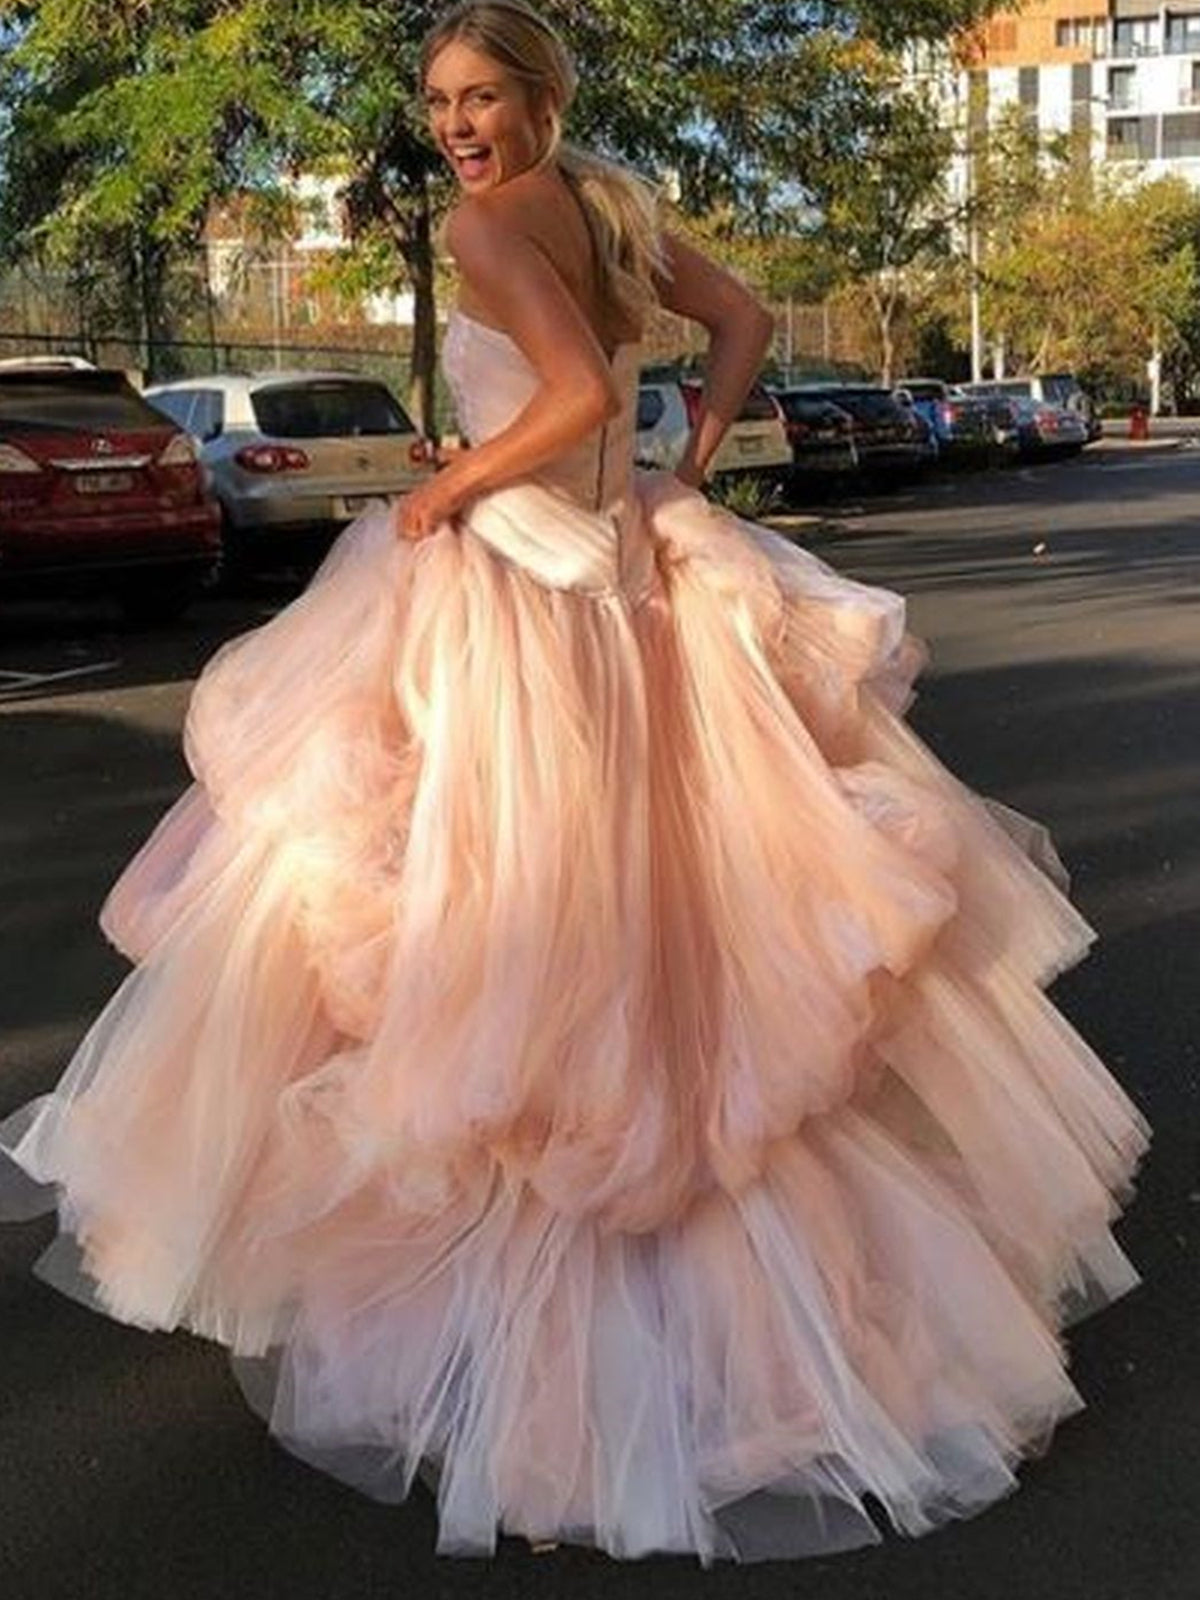 Gorgeous Strapless Layered Light Pink Tulle Long Prom Dresses, Light Pink Tulle Formal Graduation Evening Dresses 